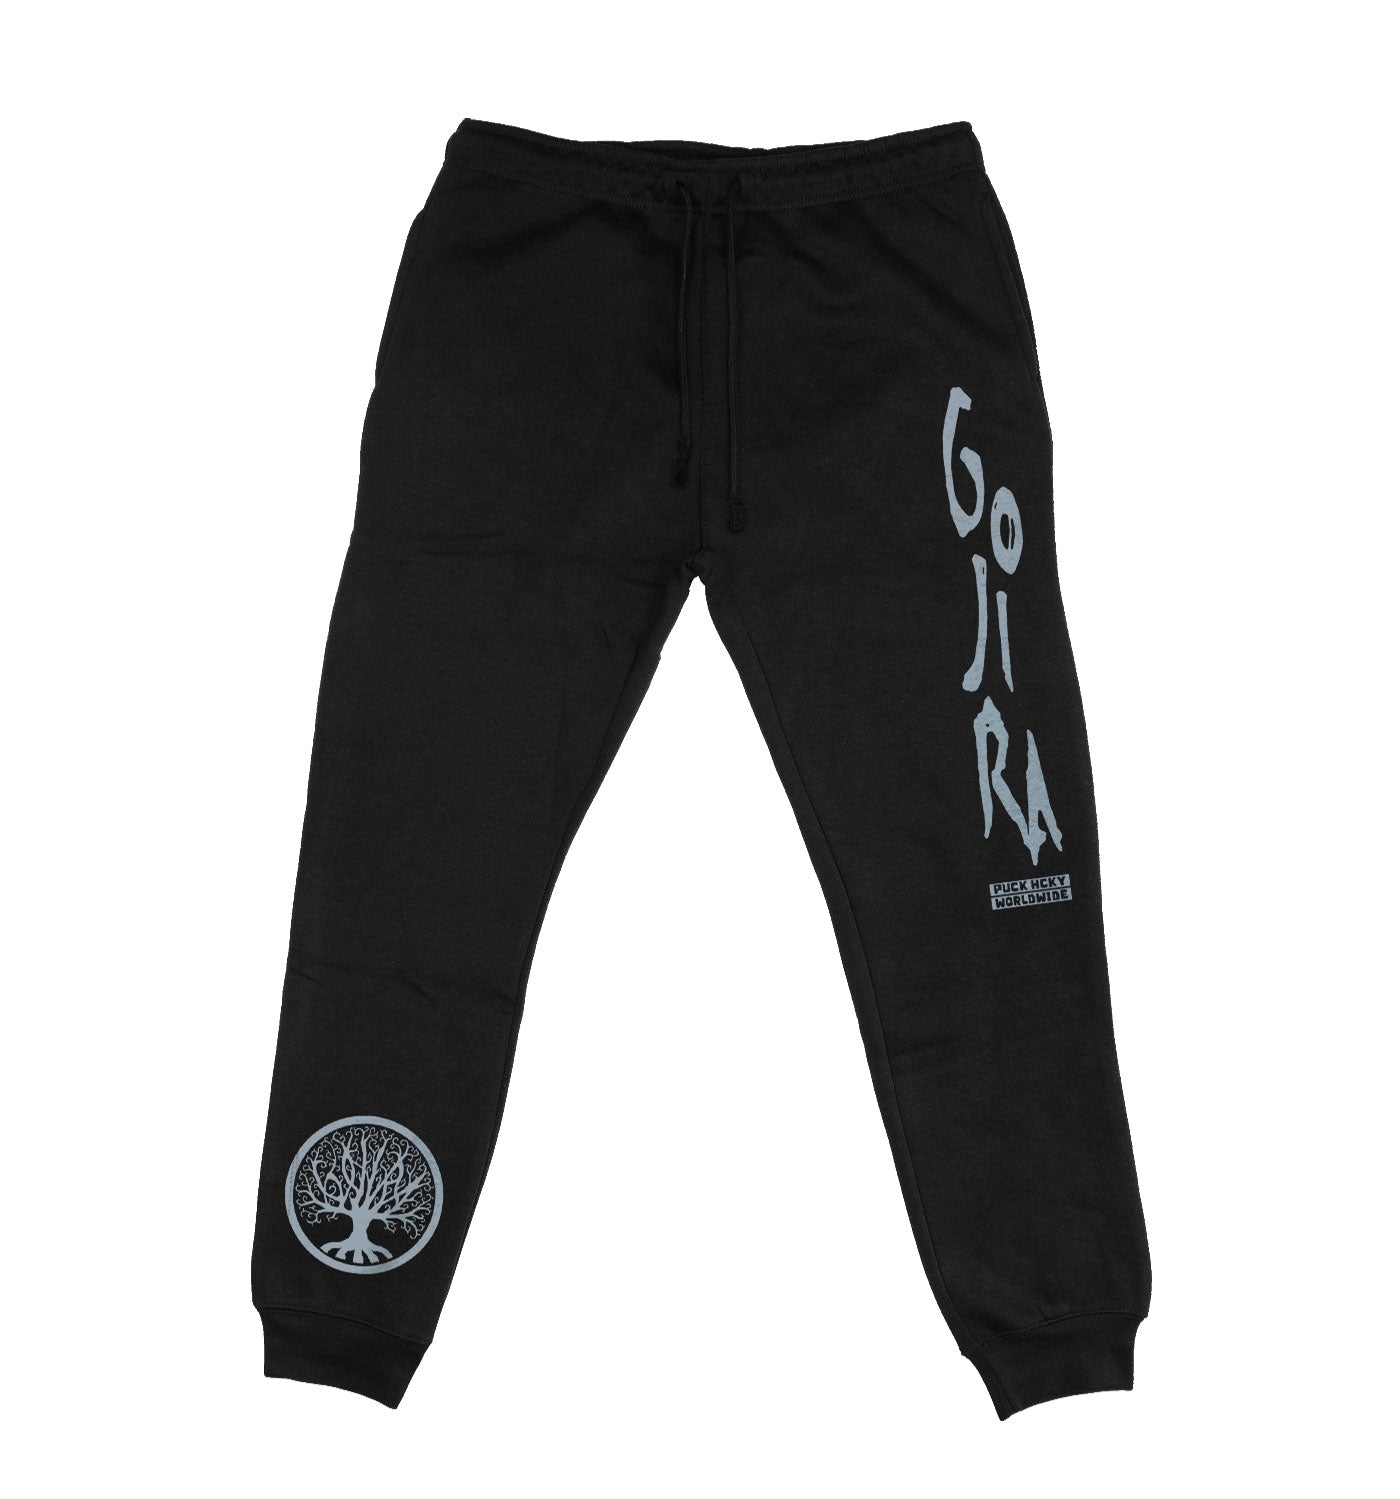 GOJIRA 'FROM THE TREES' hockey jogging pants in black front view